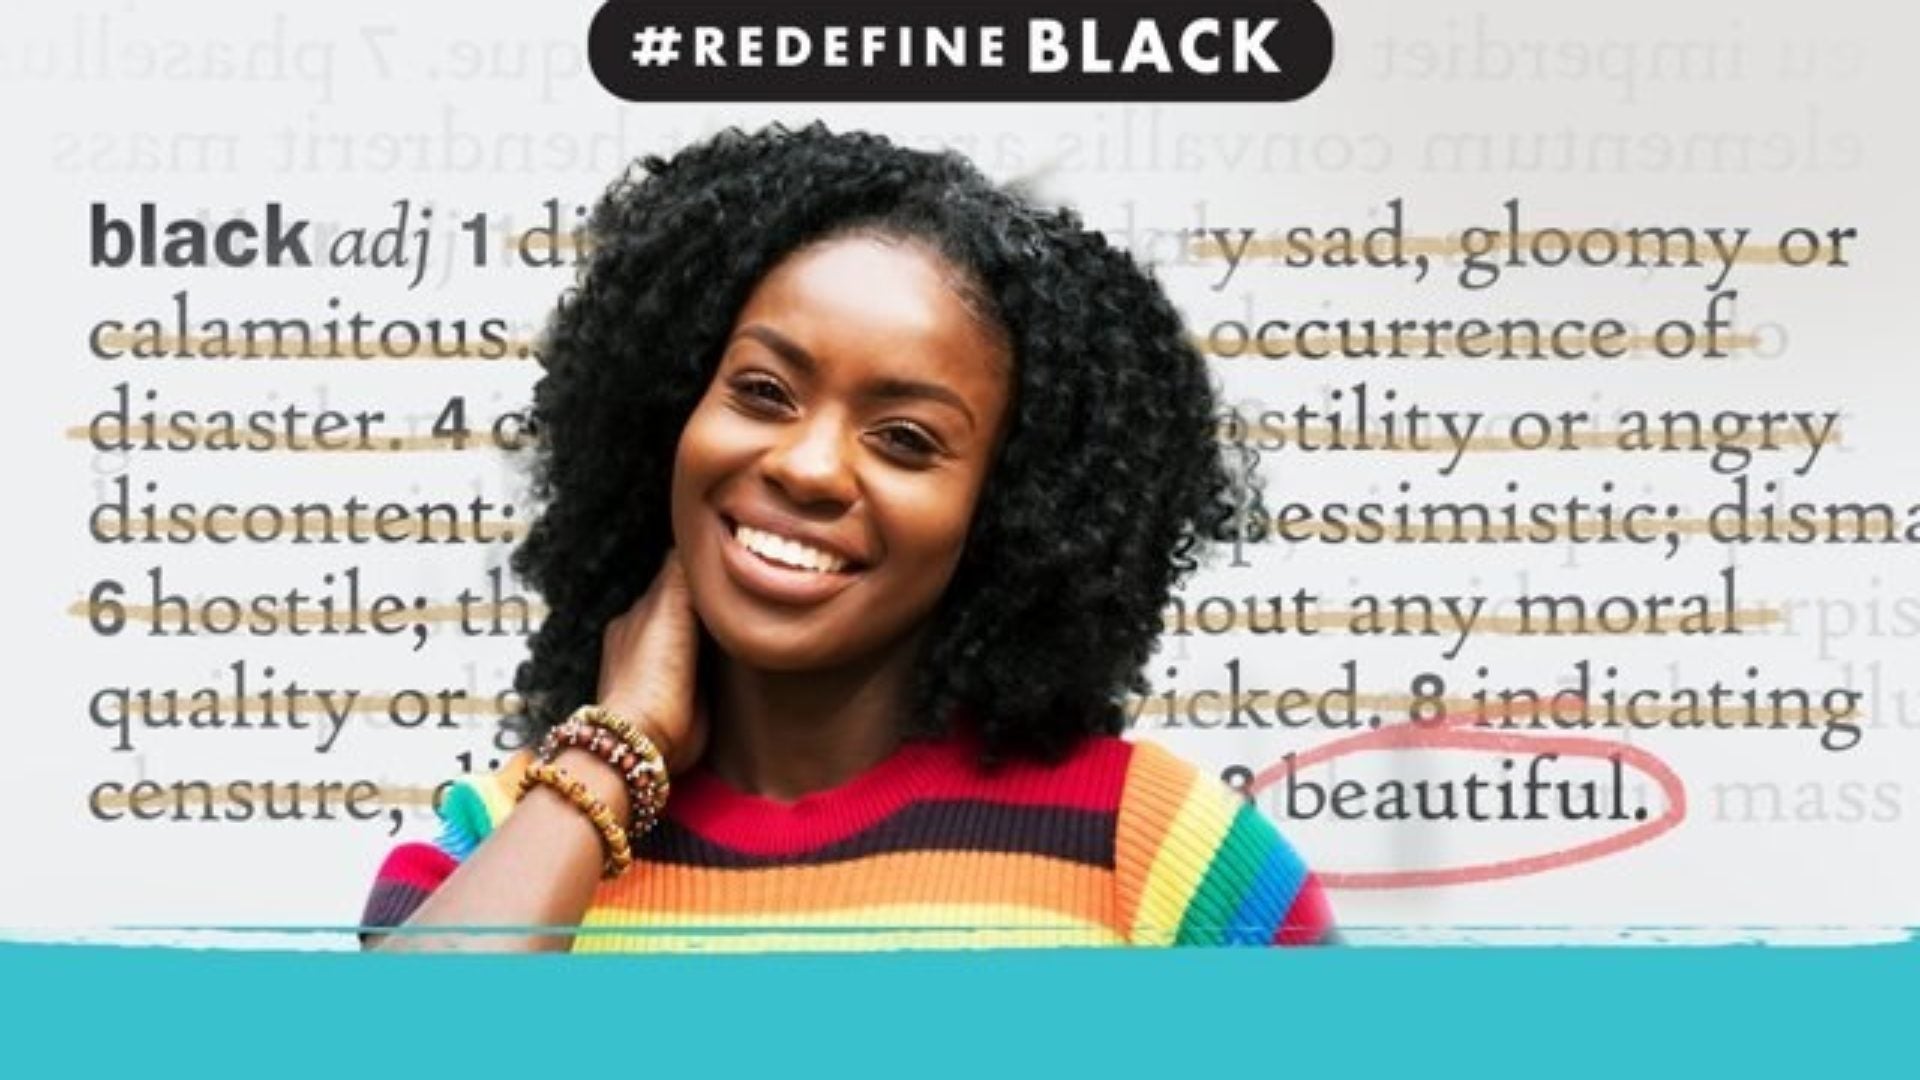 Procter and Gamble's My Black Is Beautiful Platform Launches Initiative To #RedefineBlack